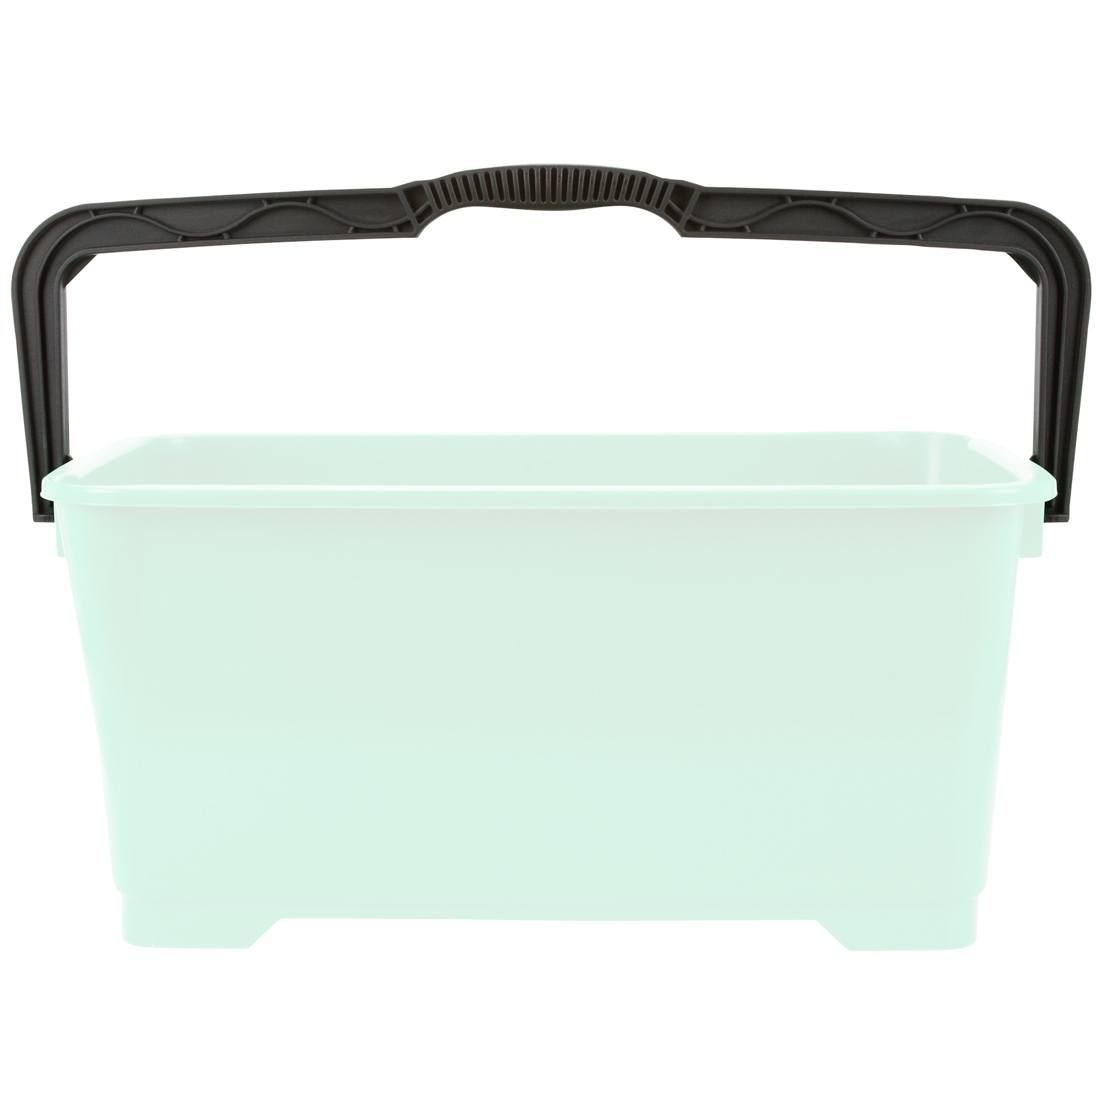 Unger Pro Bucket Handle - Highlighted with Bucket - Front View